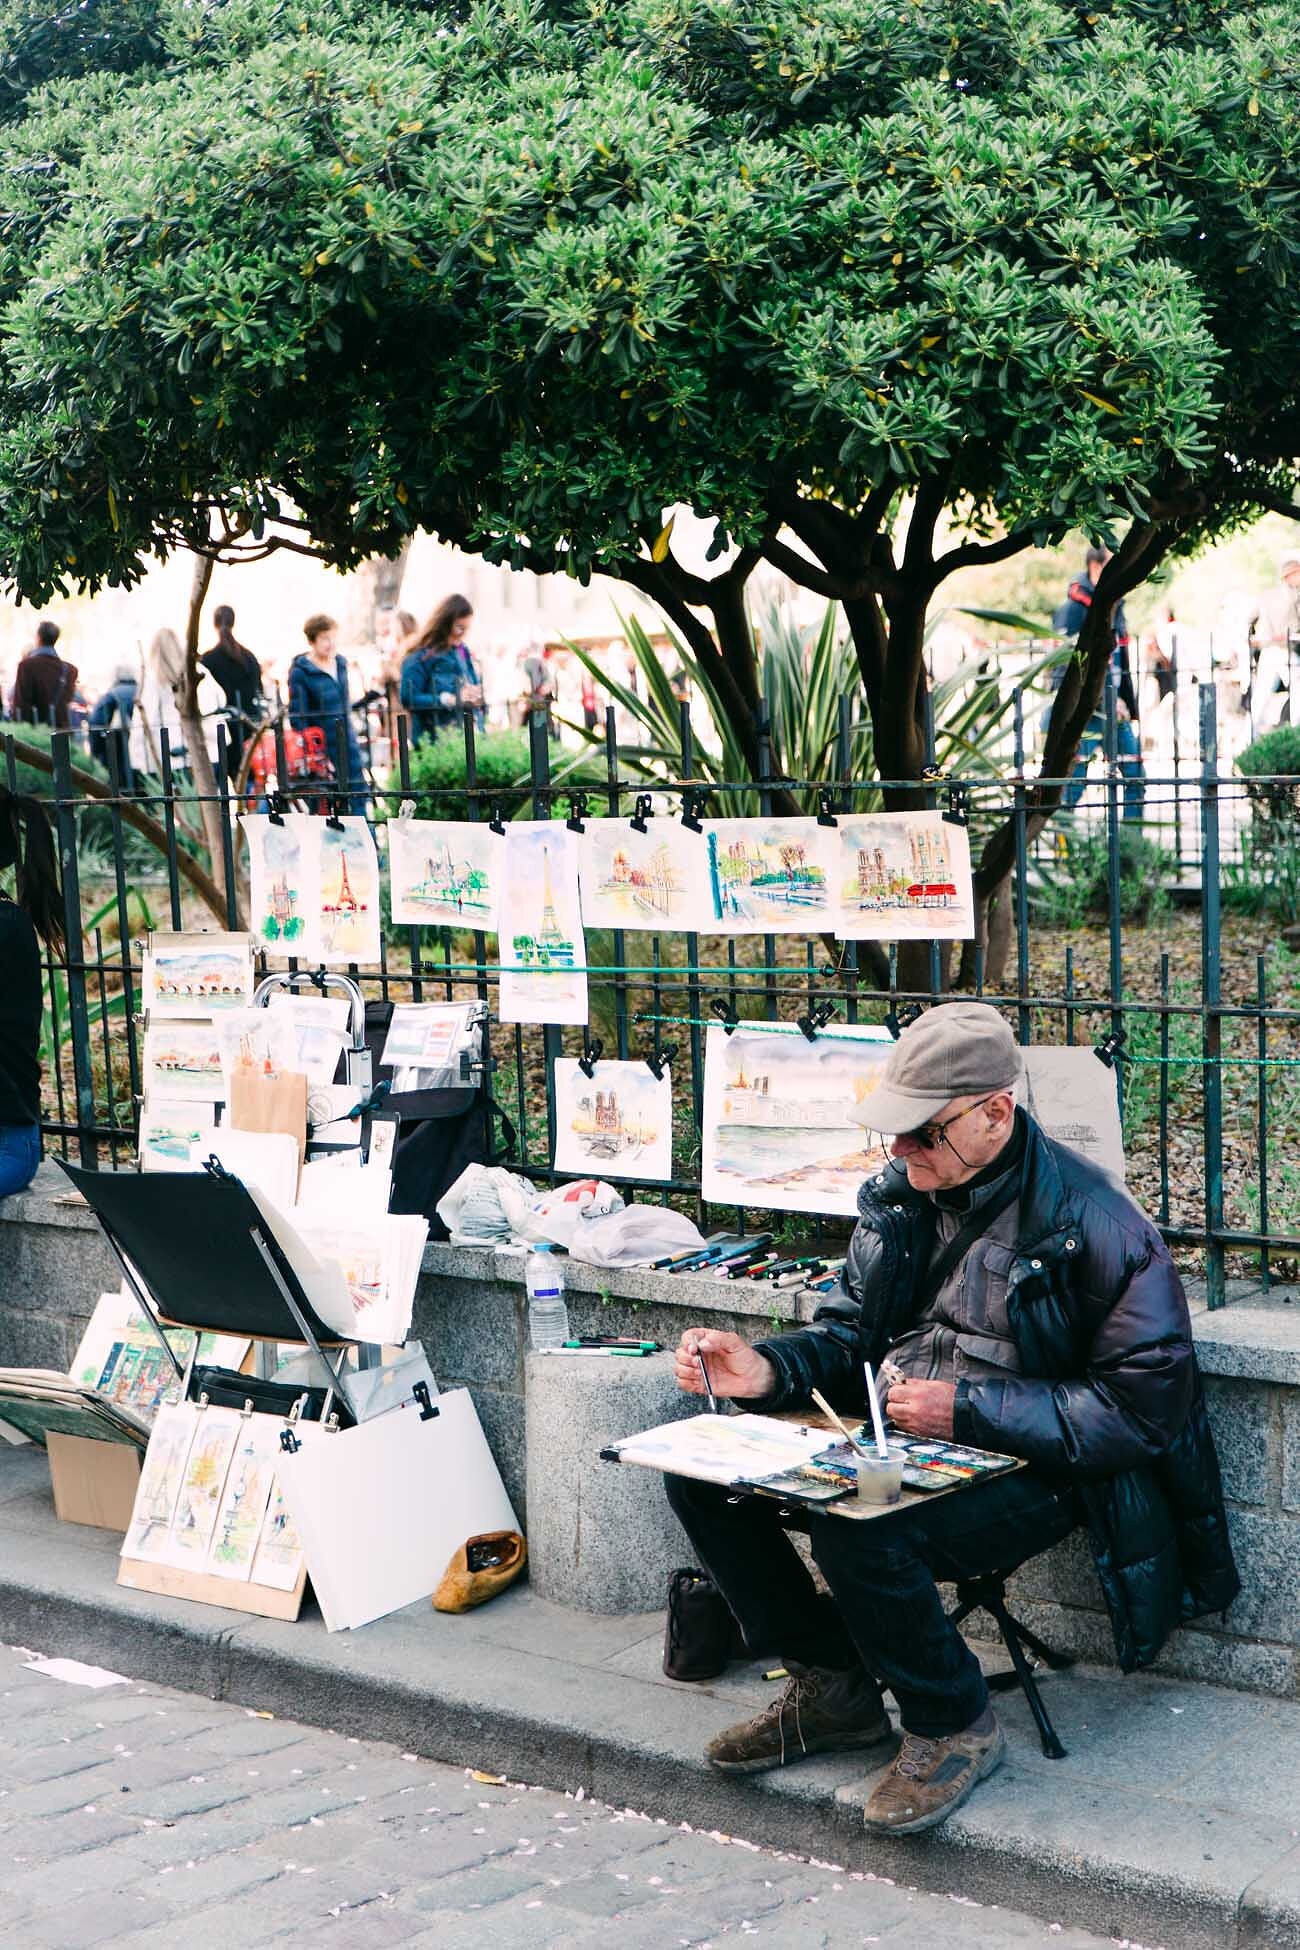 Man painting on the sidewalk street artist near Shakespeare and Co in Paris, France. Chelsea Loren is based in San Diego, California